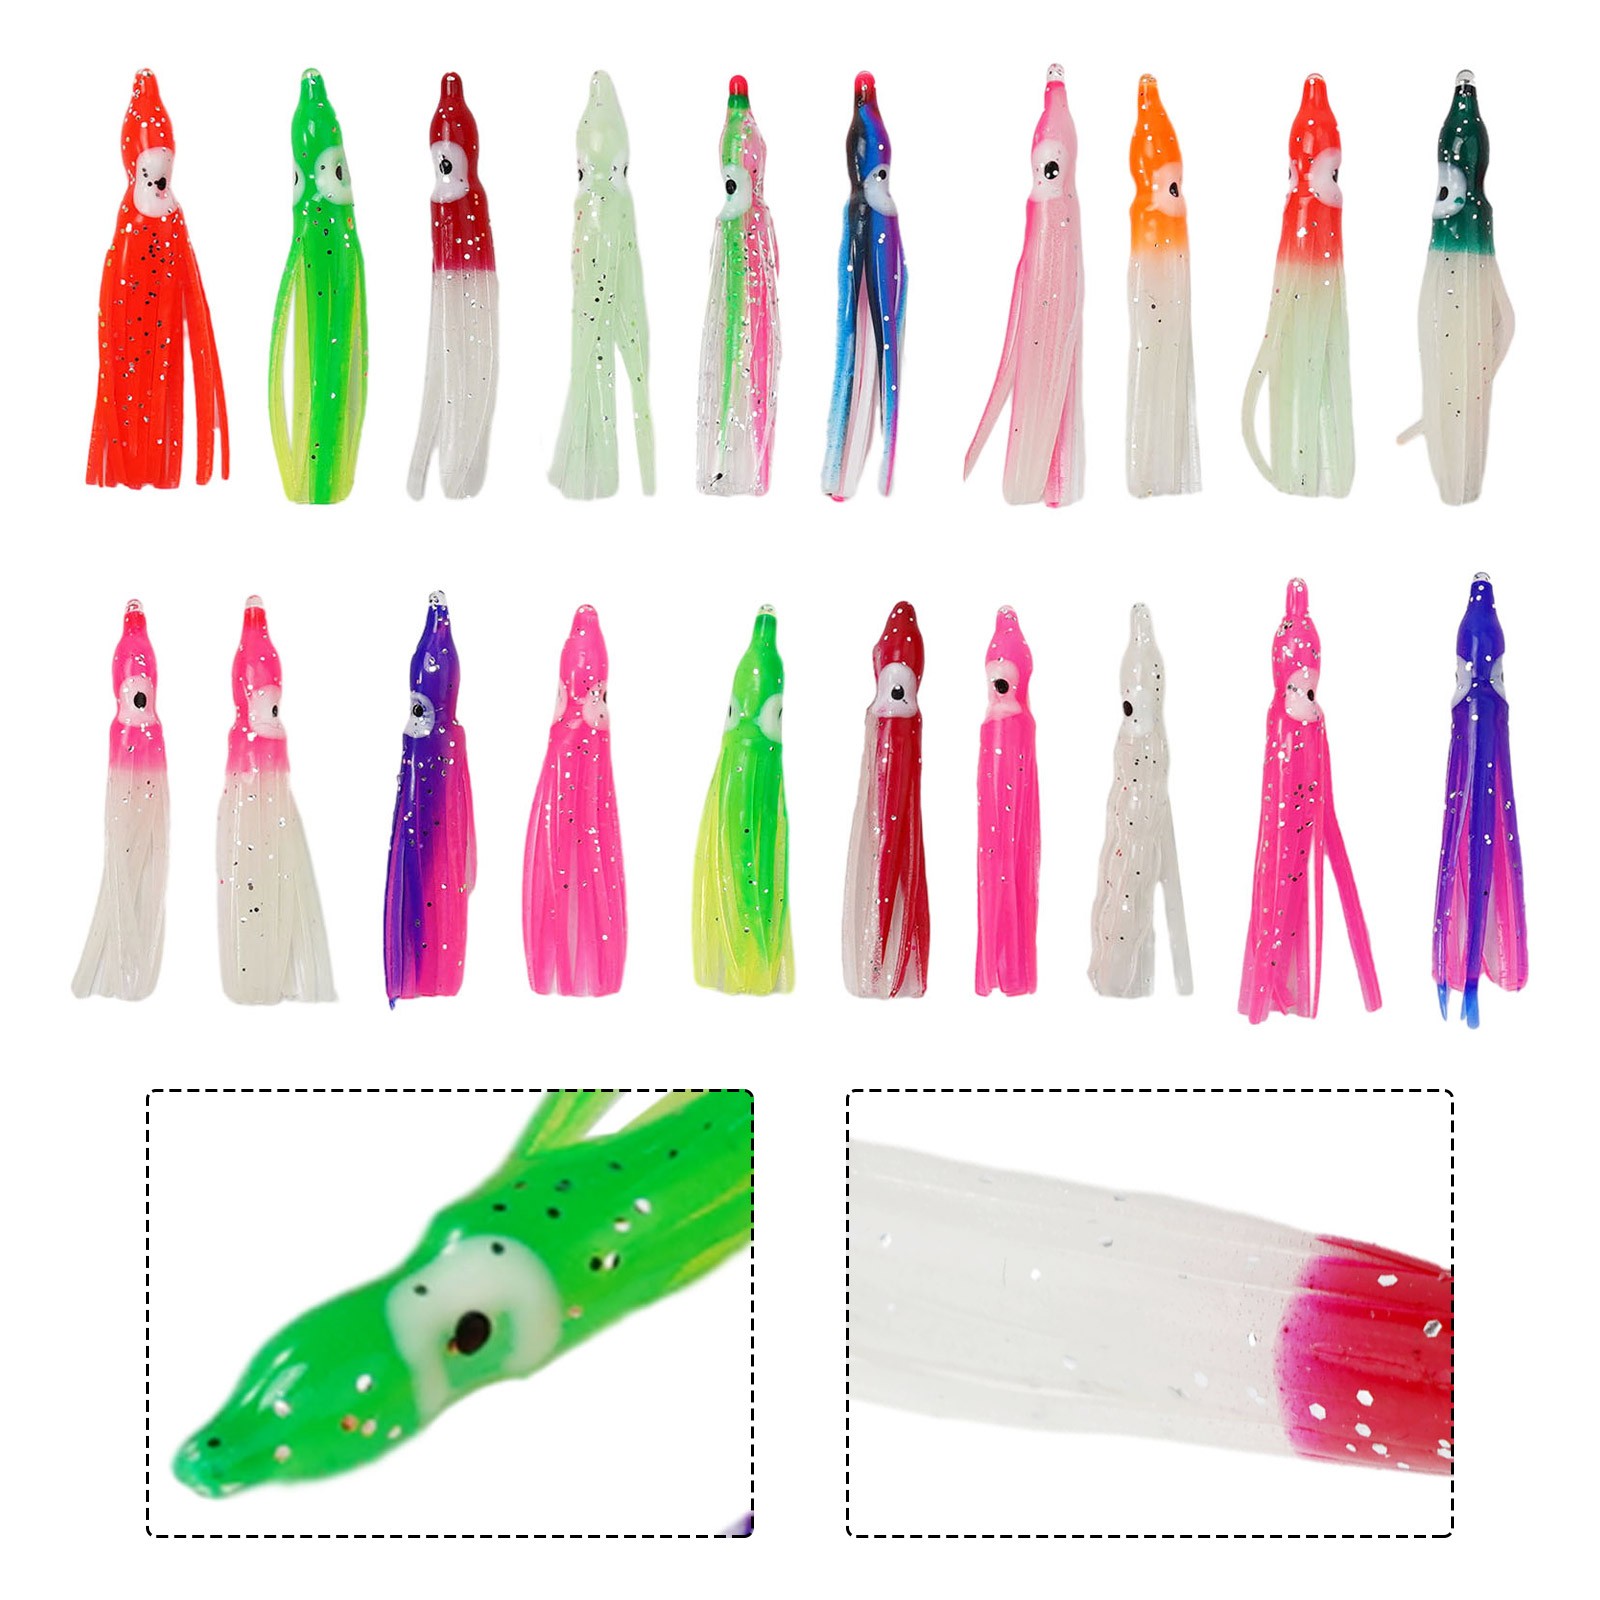 Soft PVC 20pcs Octopus Squid Fishing Lures Set in Sizes and Colors